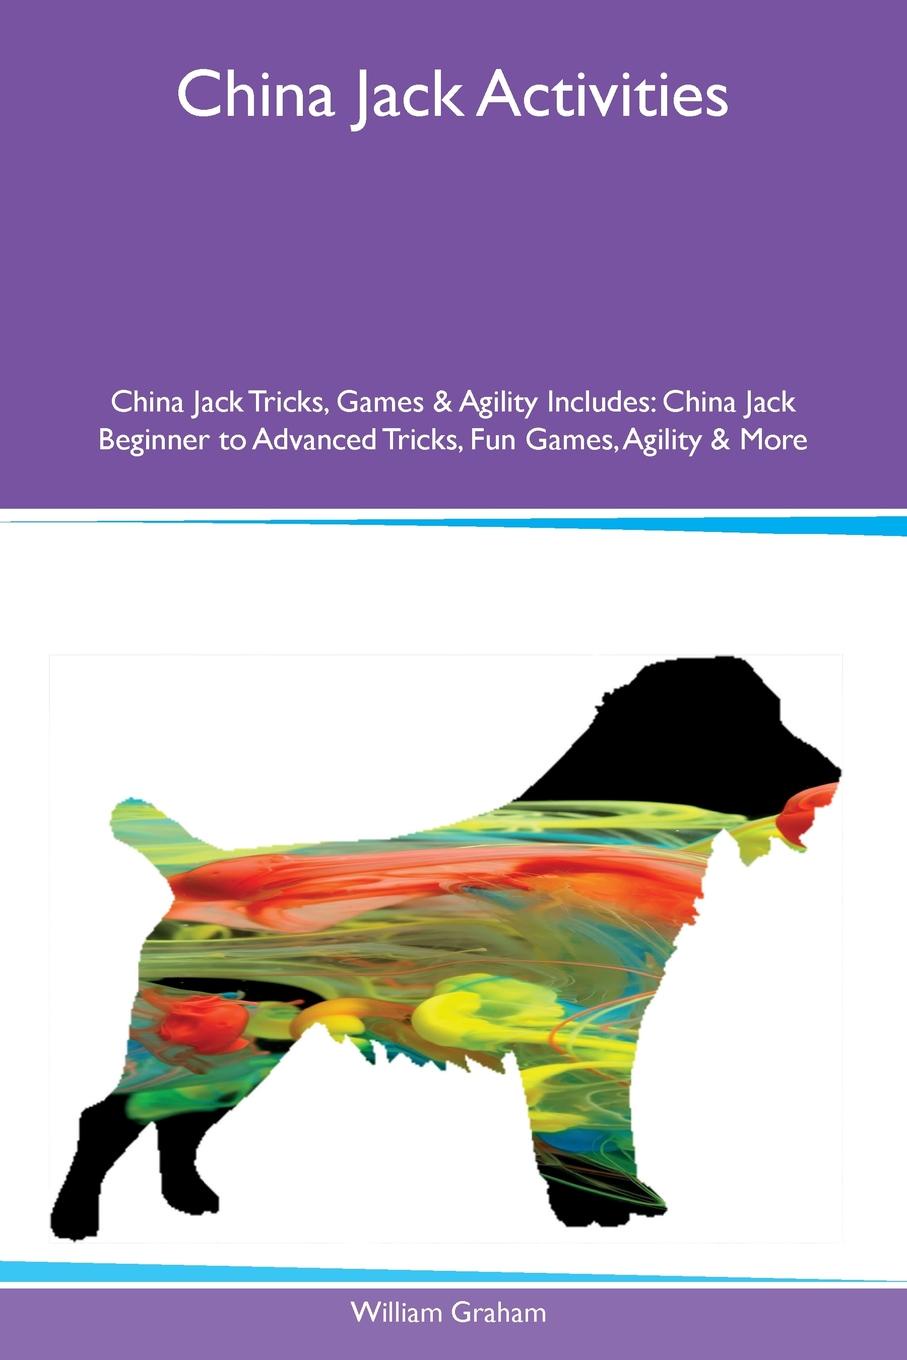 China Jack Activities China Jack Tricks, Games & Agility Includes. China Jack Beginner to Advanced Tricks, Fun Games, Agility & More